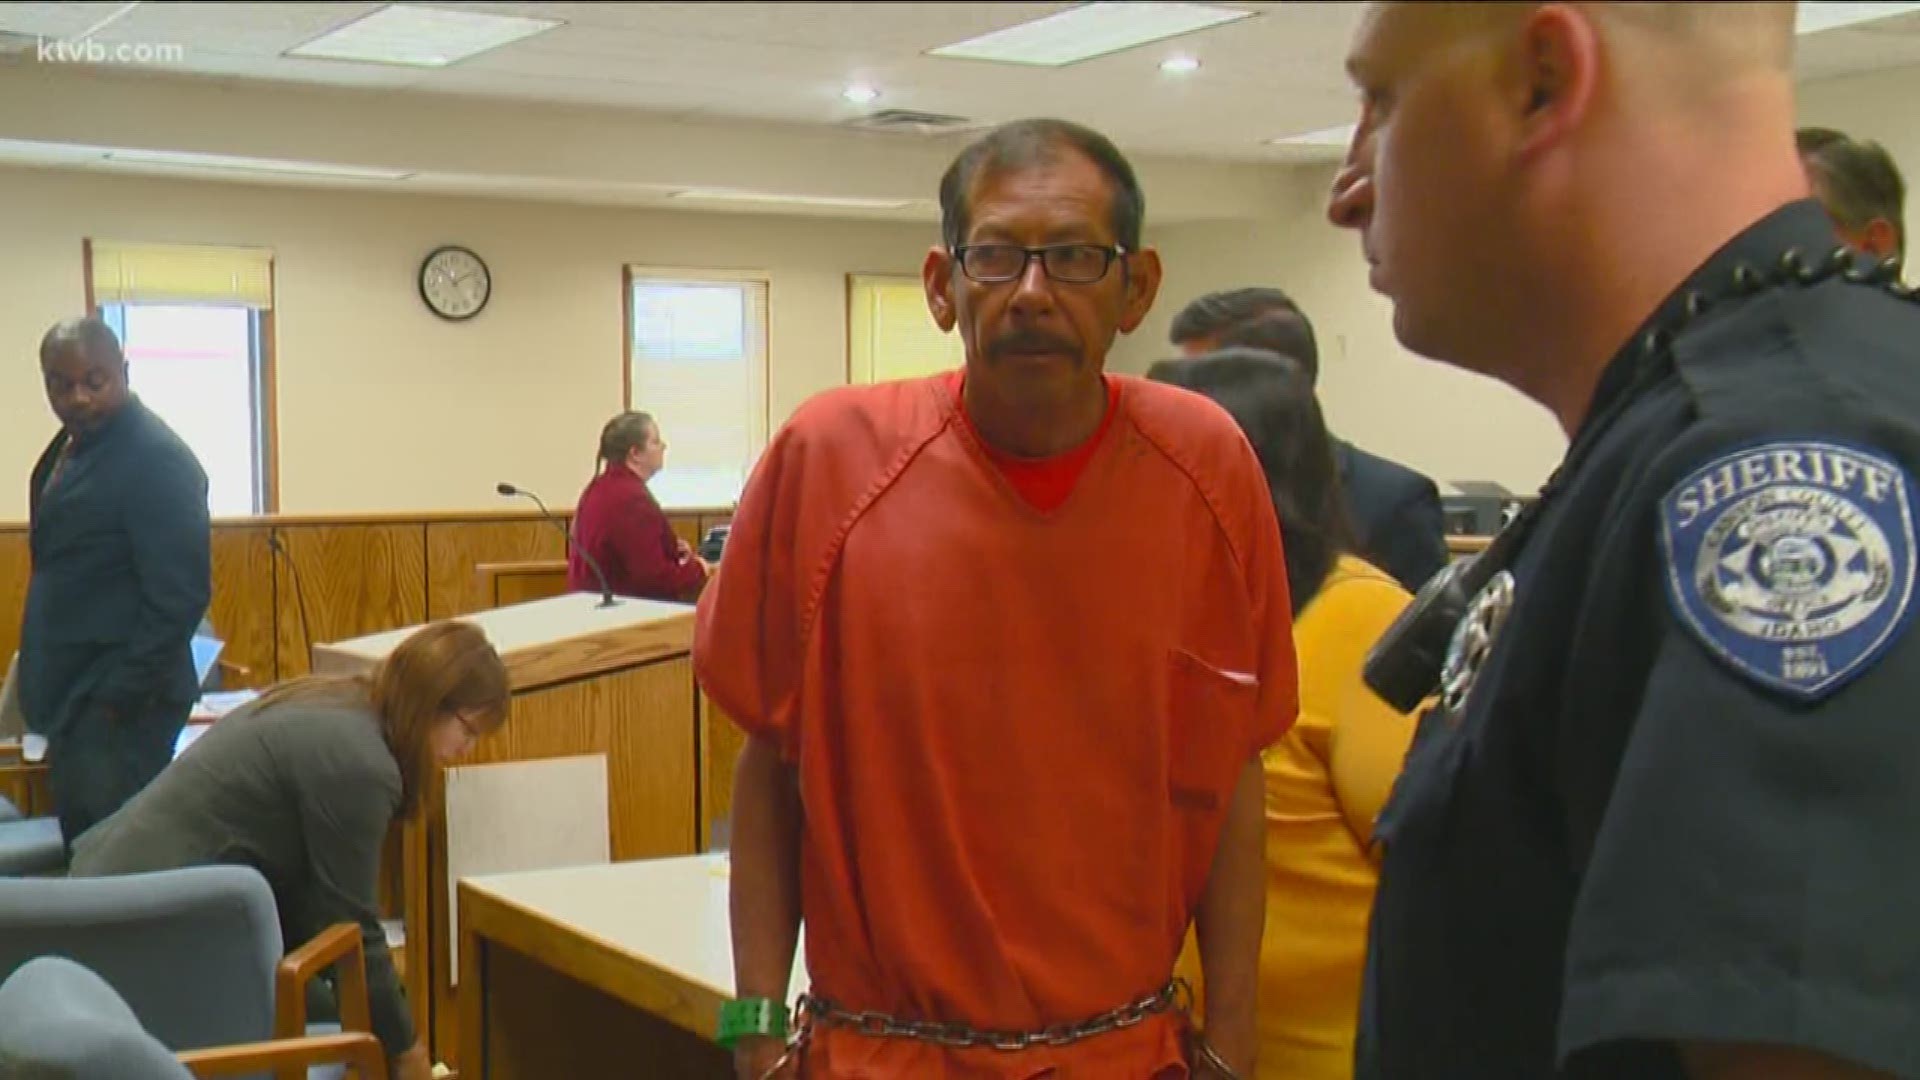 The judge says that Rene Jaramillo Navarrete continued to shot the victim after he fell to the ground.